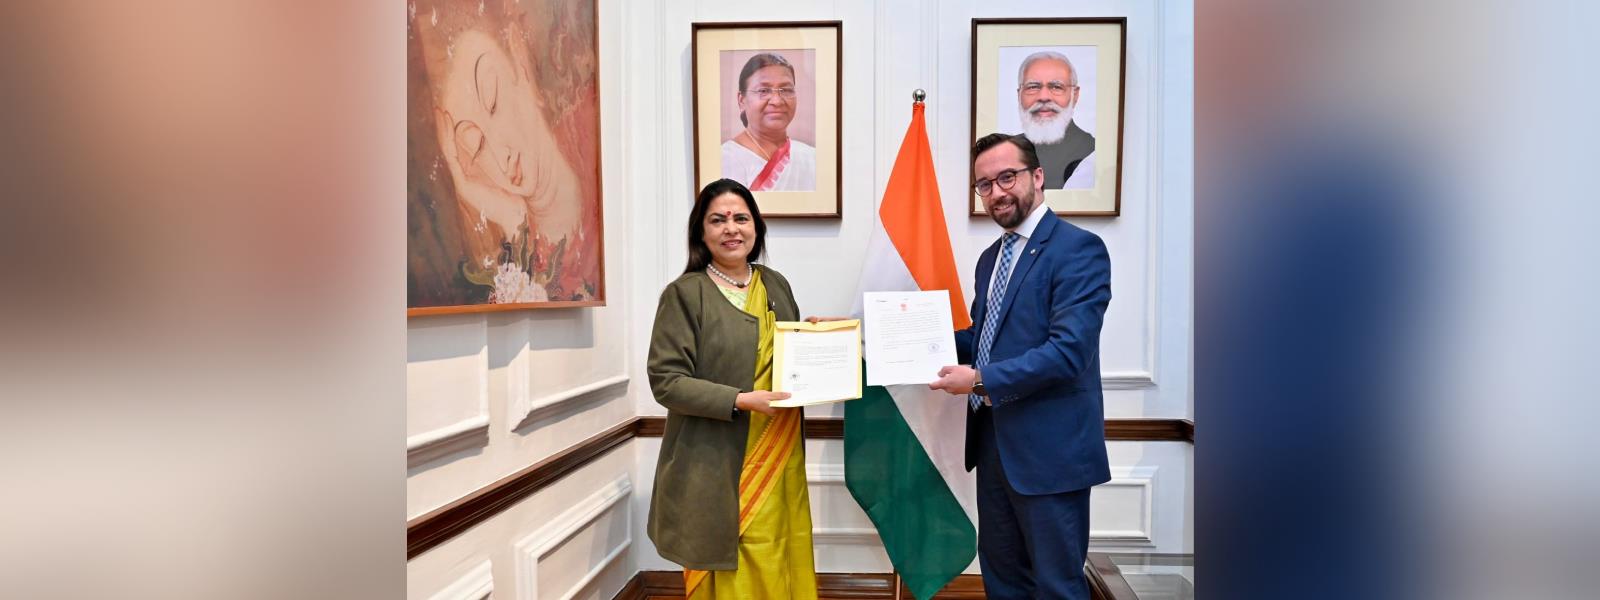 Minister of State for External Affairs Smt. Meenakashi Lekhi met H.E. Mr. Nicolas Albertoni, Vice Minister of Foreign Affairs of Uruguay in New Delhi